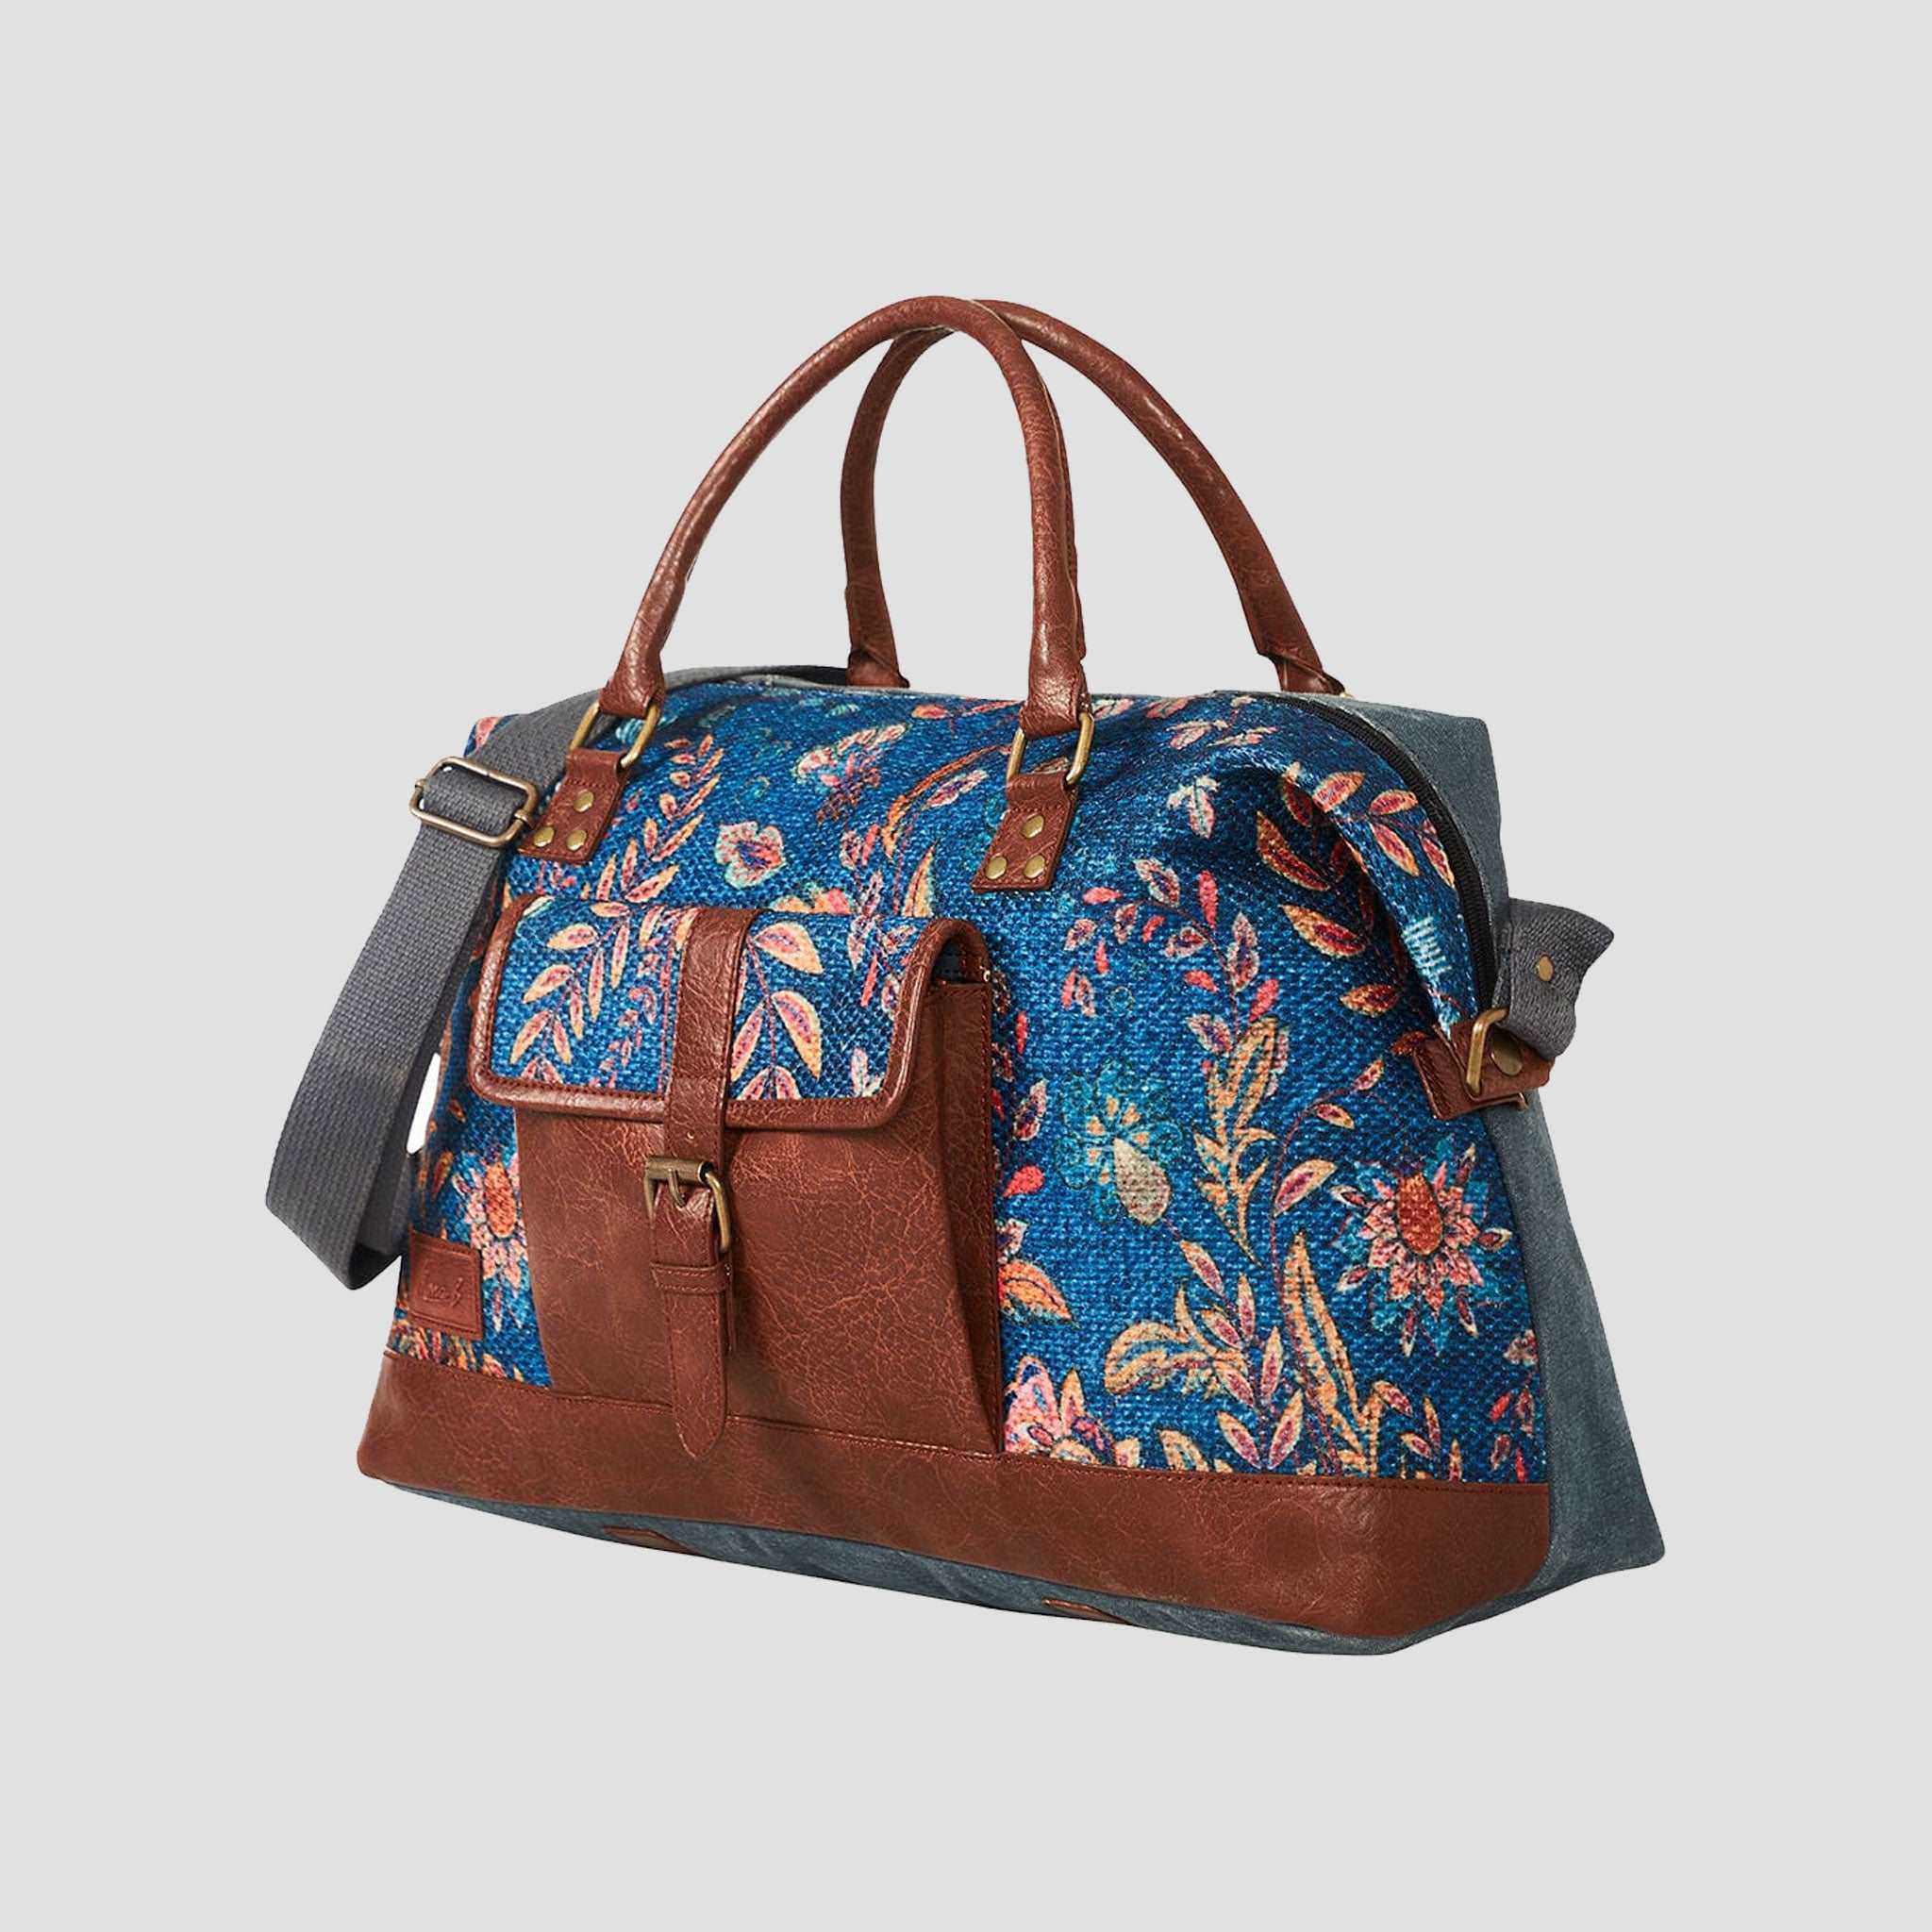 Mona B Canvas Large Duffel Gym Travel and Sports Bag with Stylish Design for Men and Women (Multicolor, Kilim) - (M-7010) - Duffel by Mona-B - Backpack, Flash Sale, Flat40, Sale, Shop2999, Shop3999, Special Prices